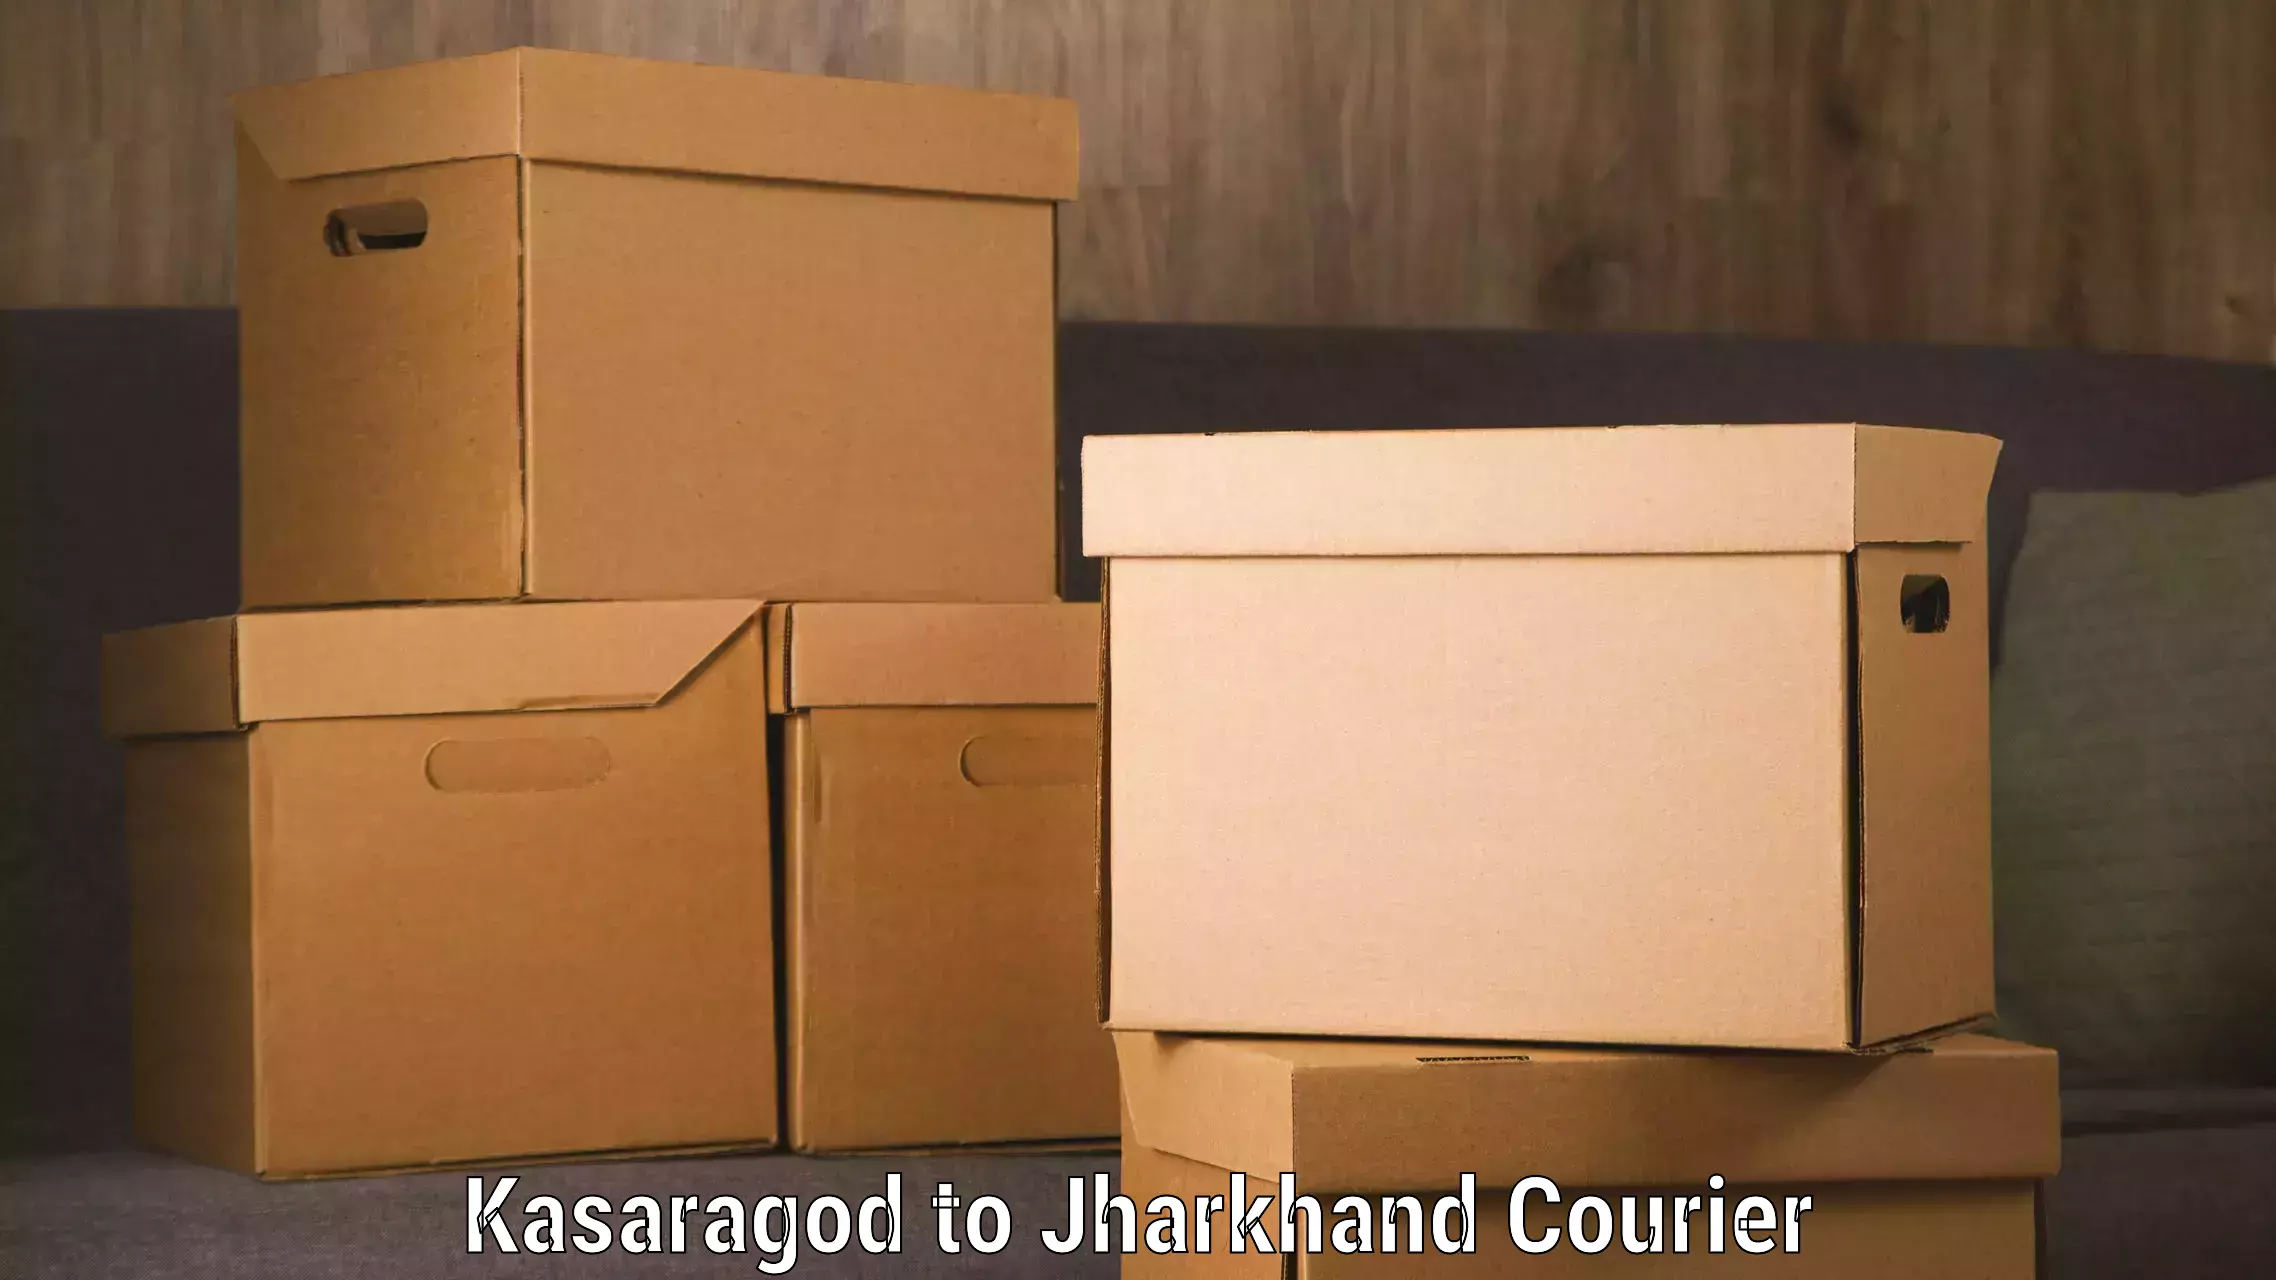 24/7 courier service Kasaragod to Jharkhand